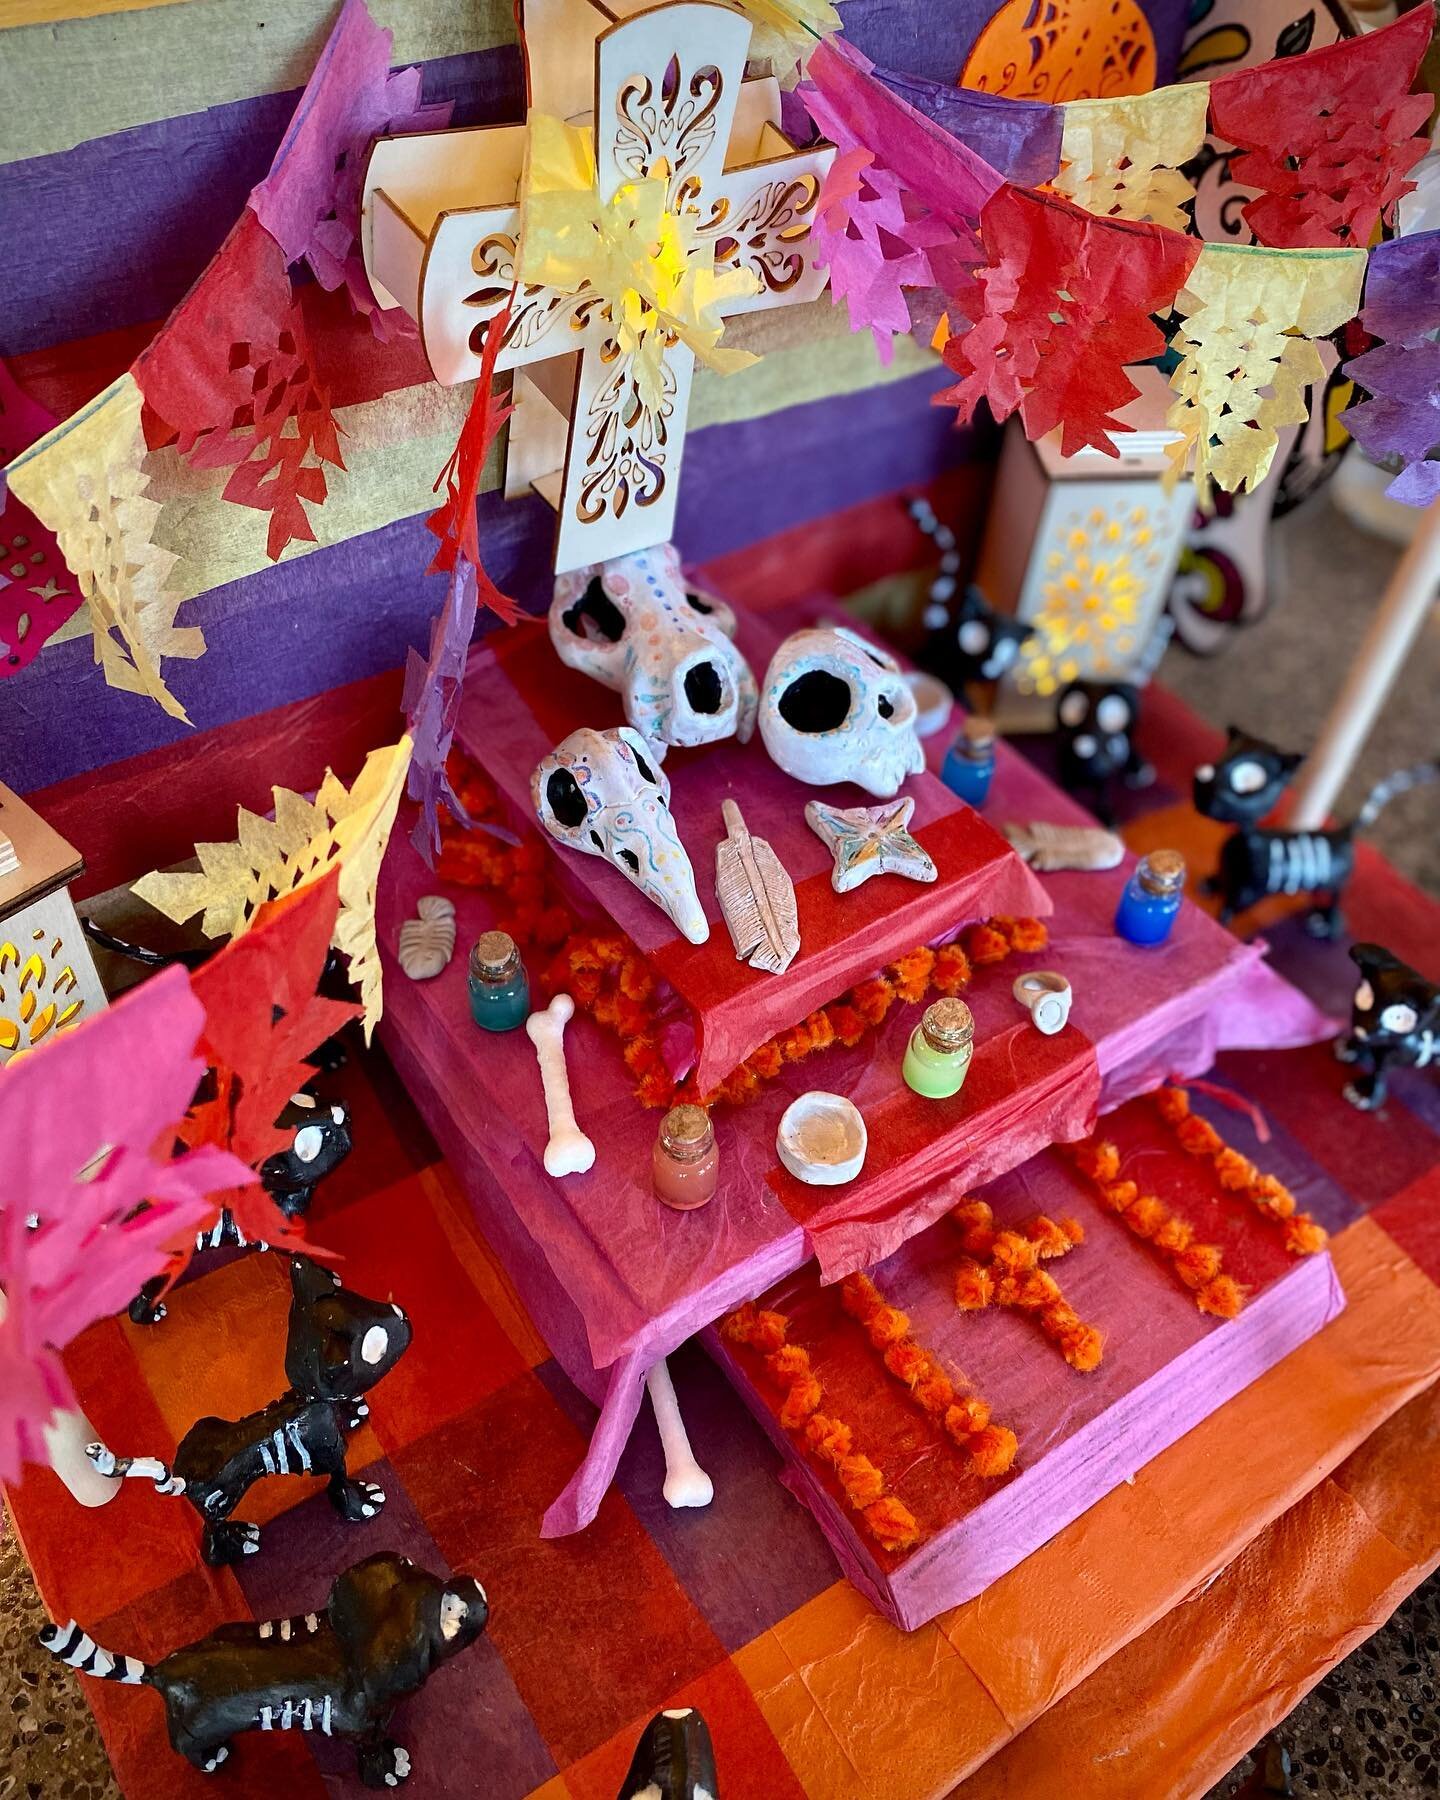 Our super good friend @zirzeroz is an 🙌incredible 🙌 local artist and made this ofrenda for Lunitas in order to celebrate D&iacute;a de los Muertos. We are so honoured to display this epic heartfelt piece of his. He made every single little animal, 